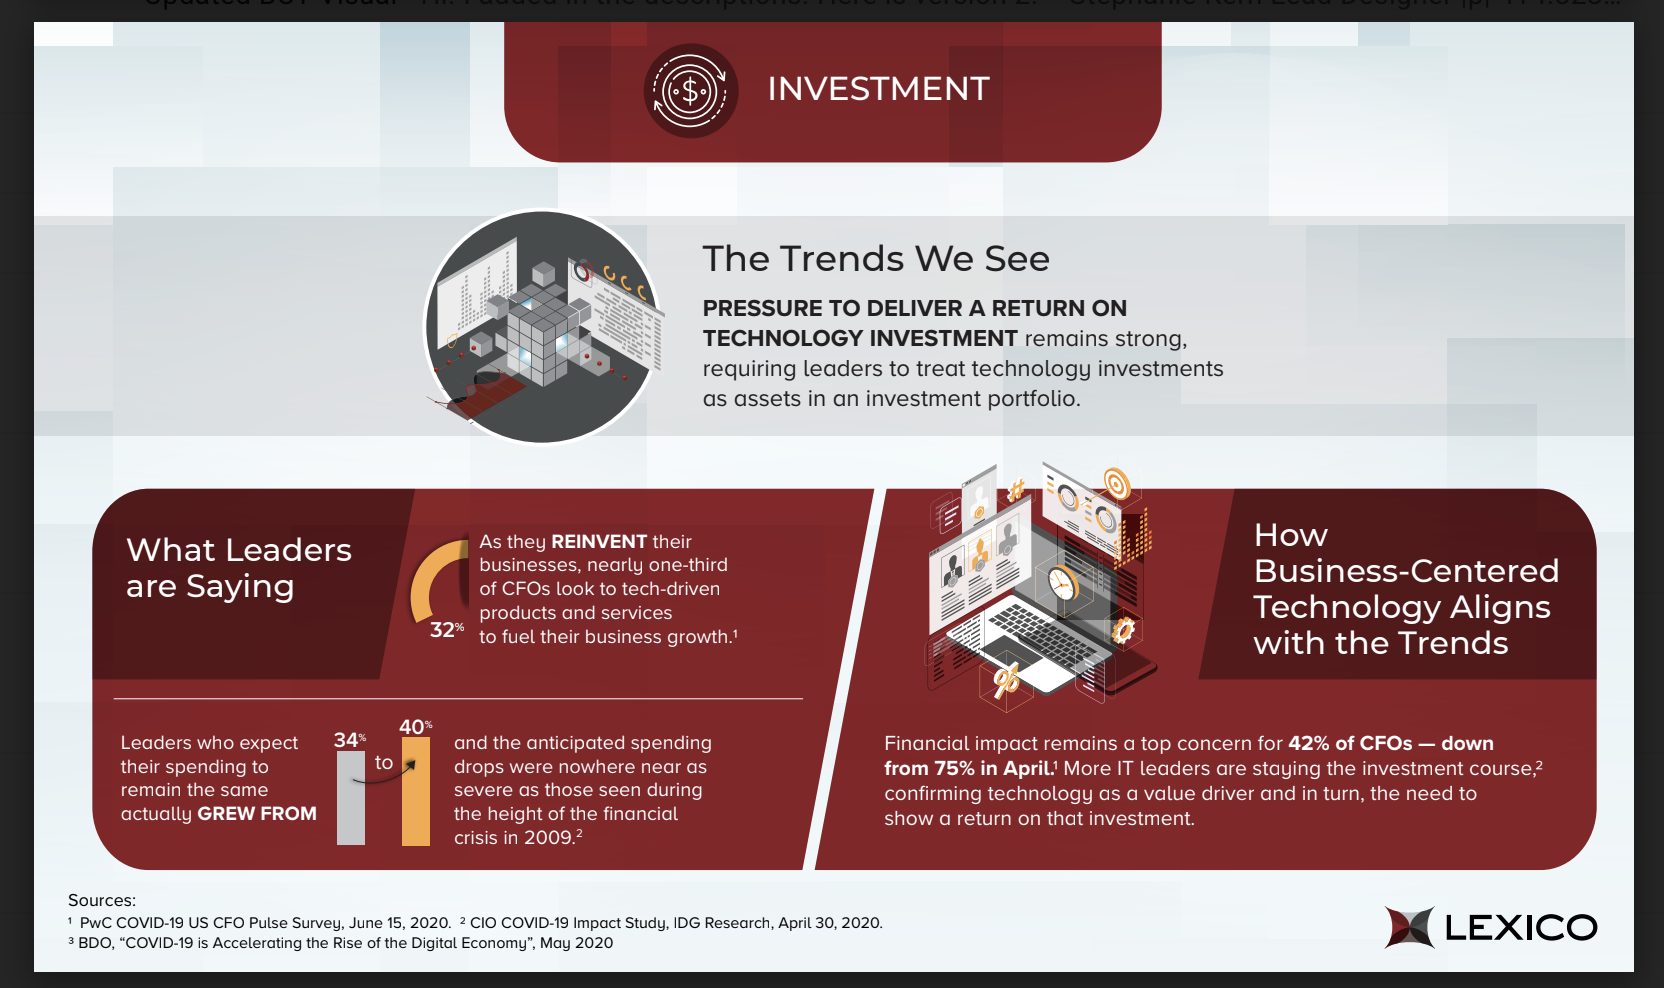 A deeper dive into investment trends of business-centered technology.